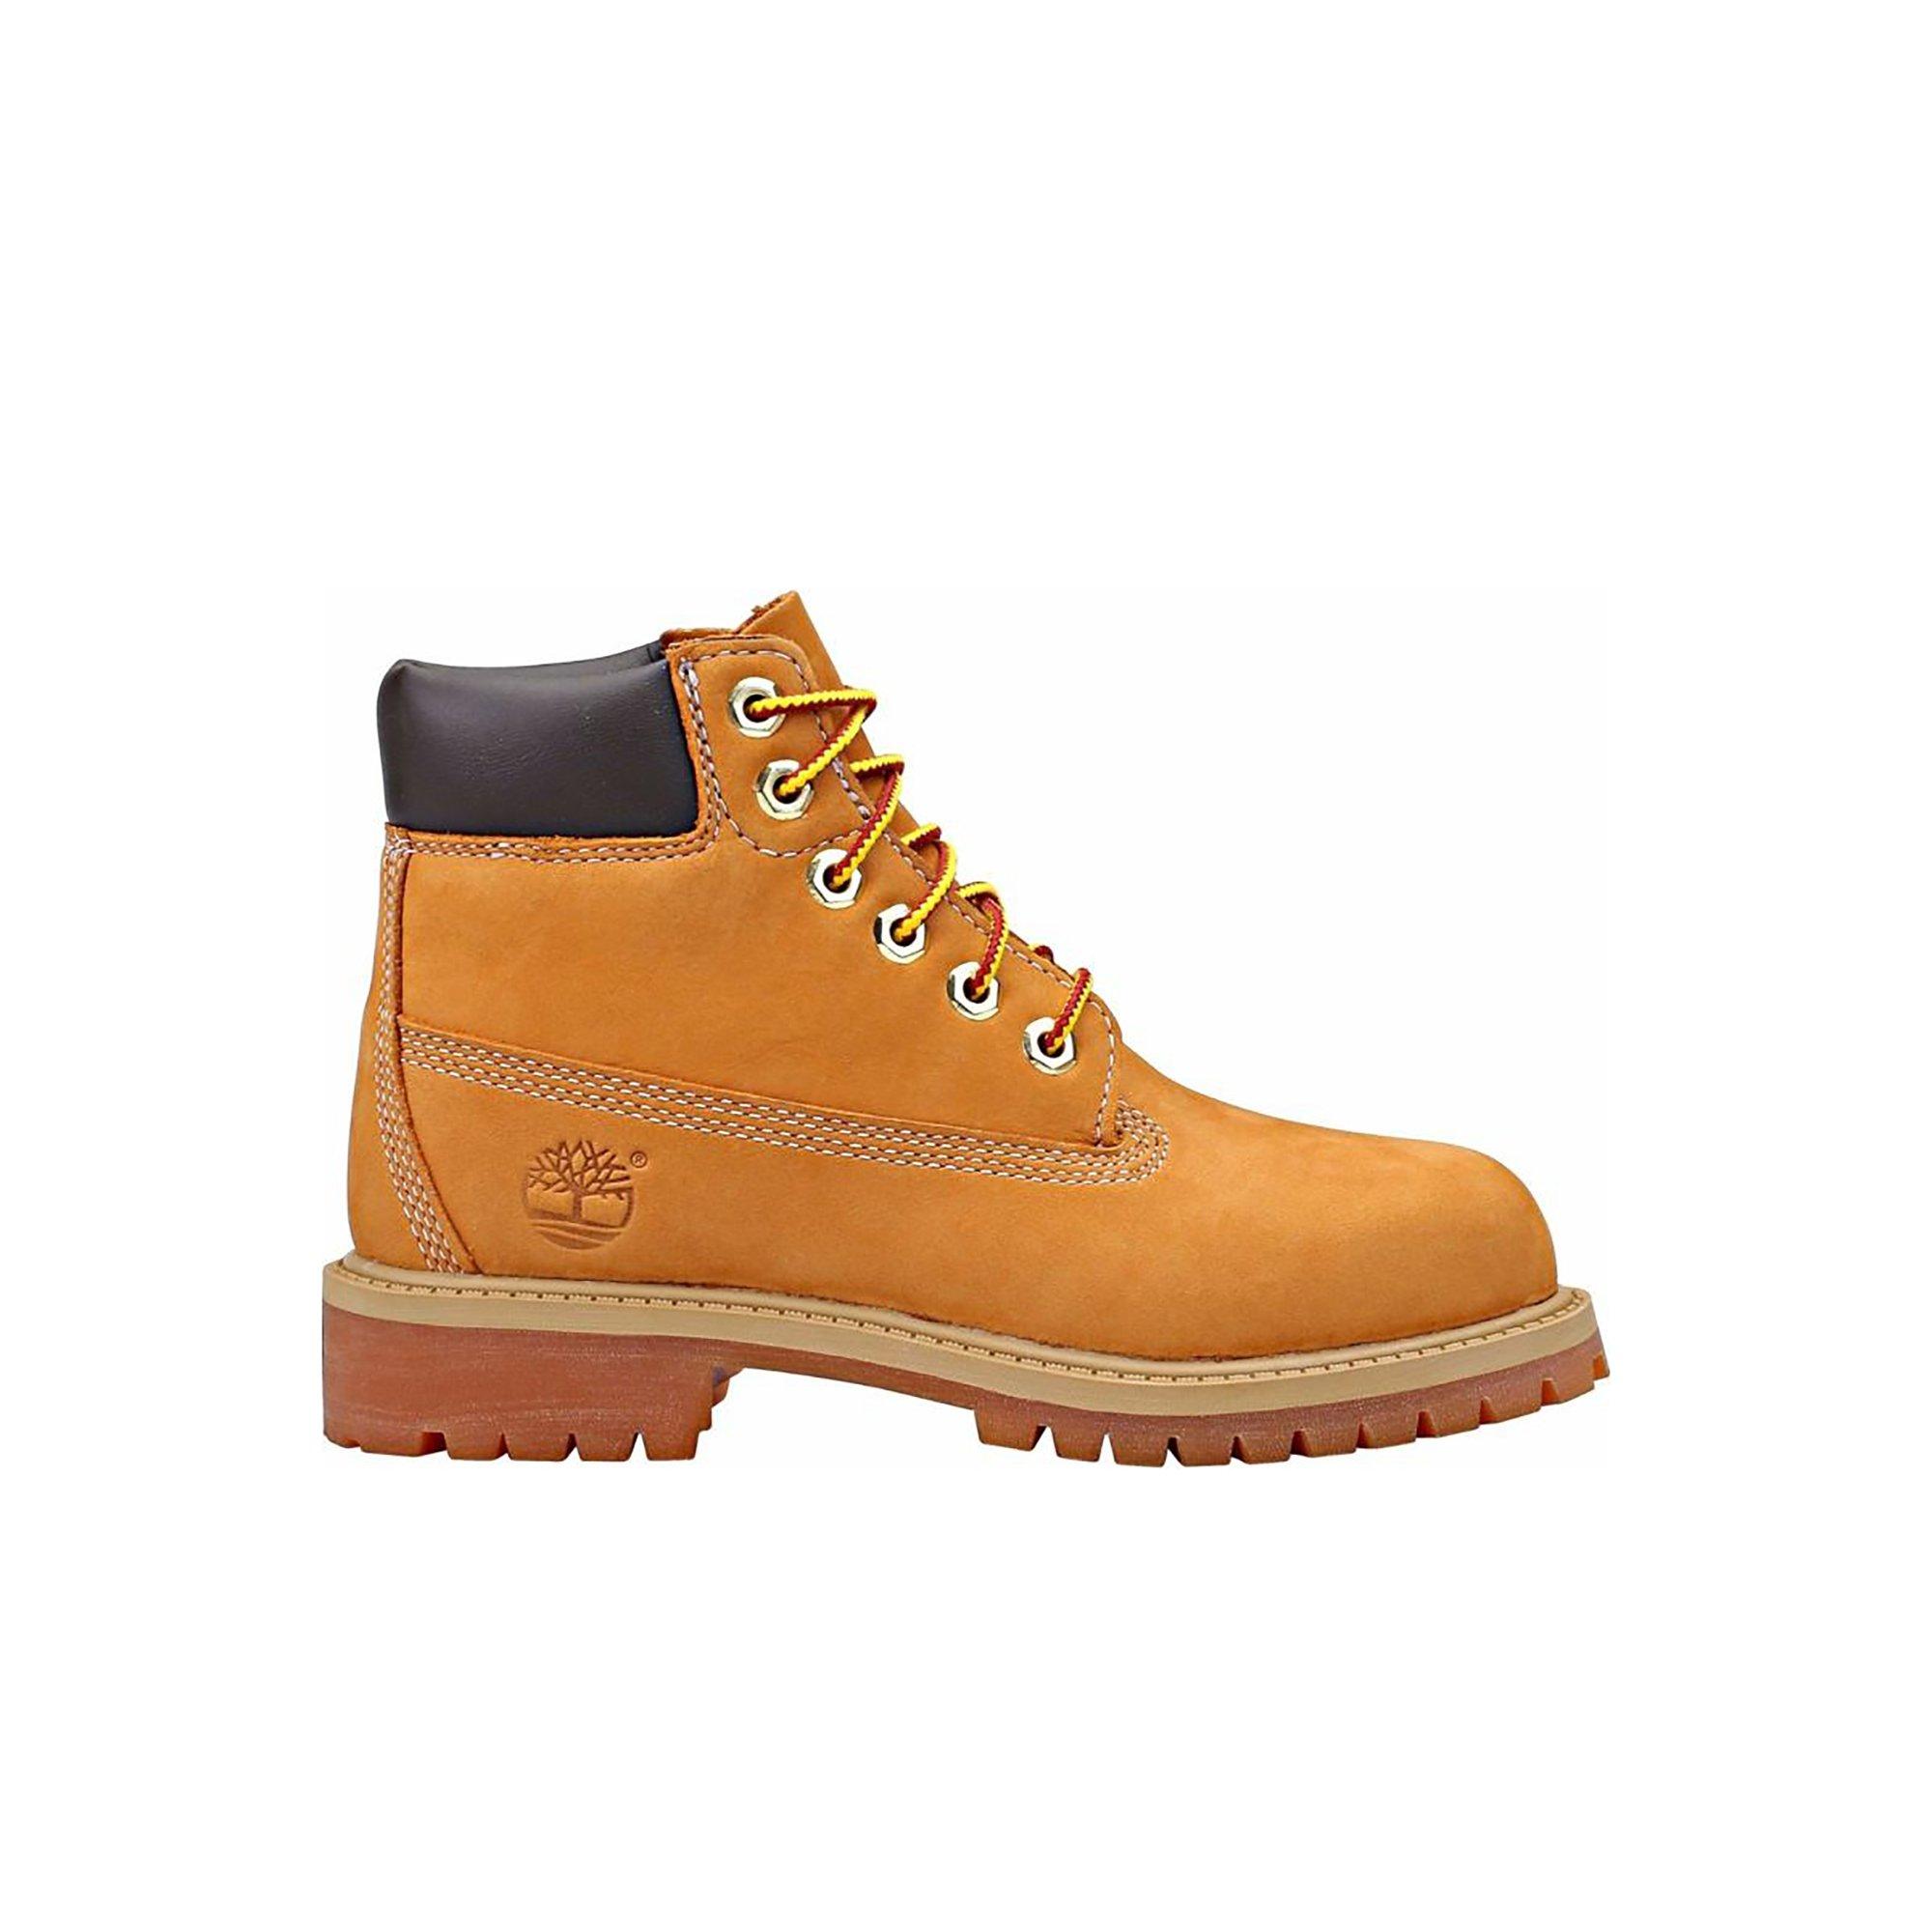 Timberland | Boots, Shoes, Clothes 